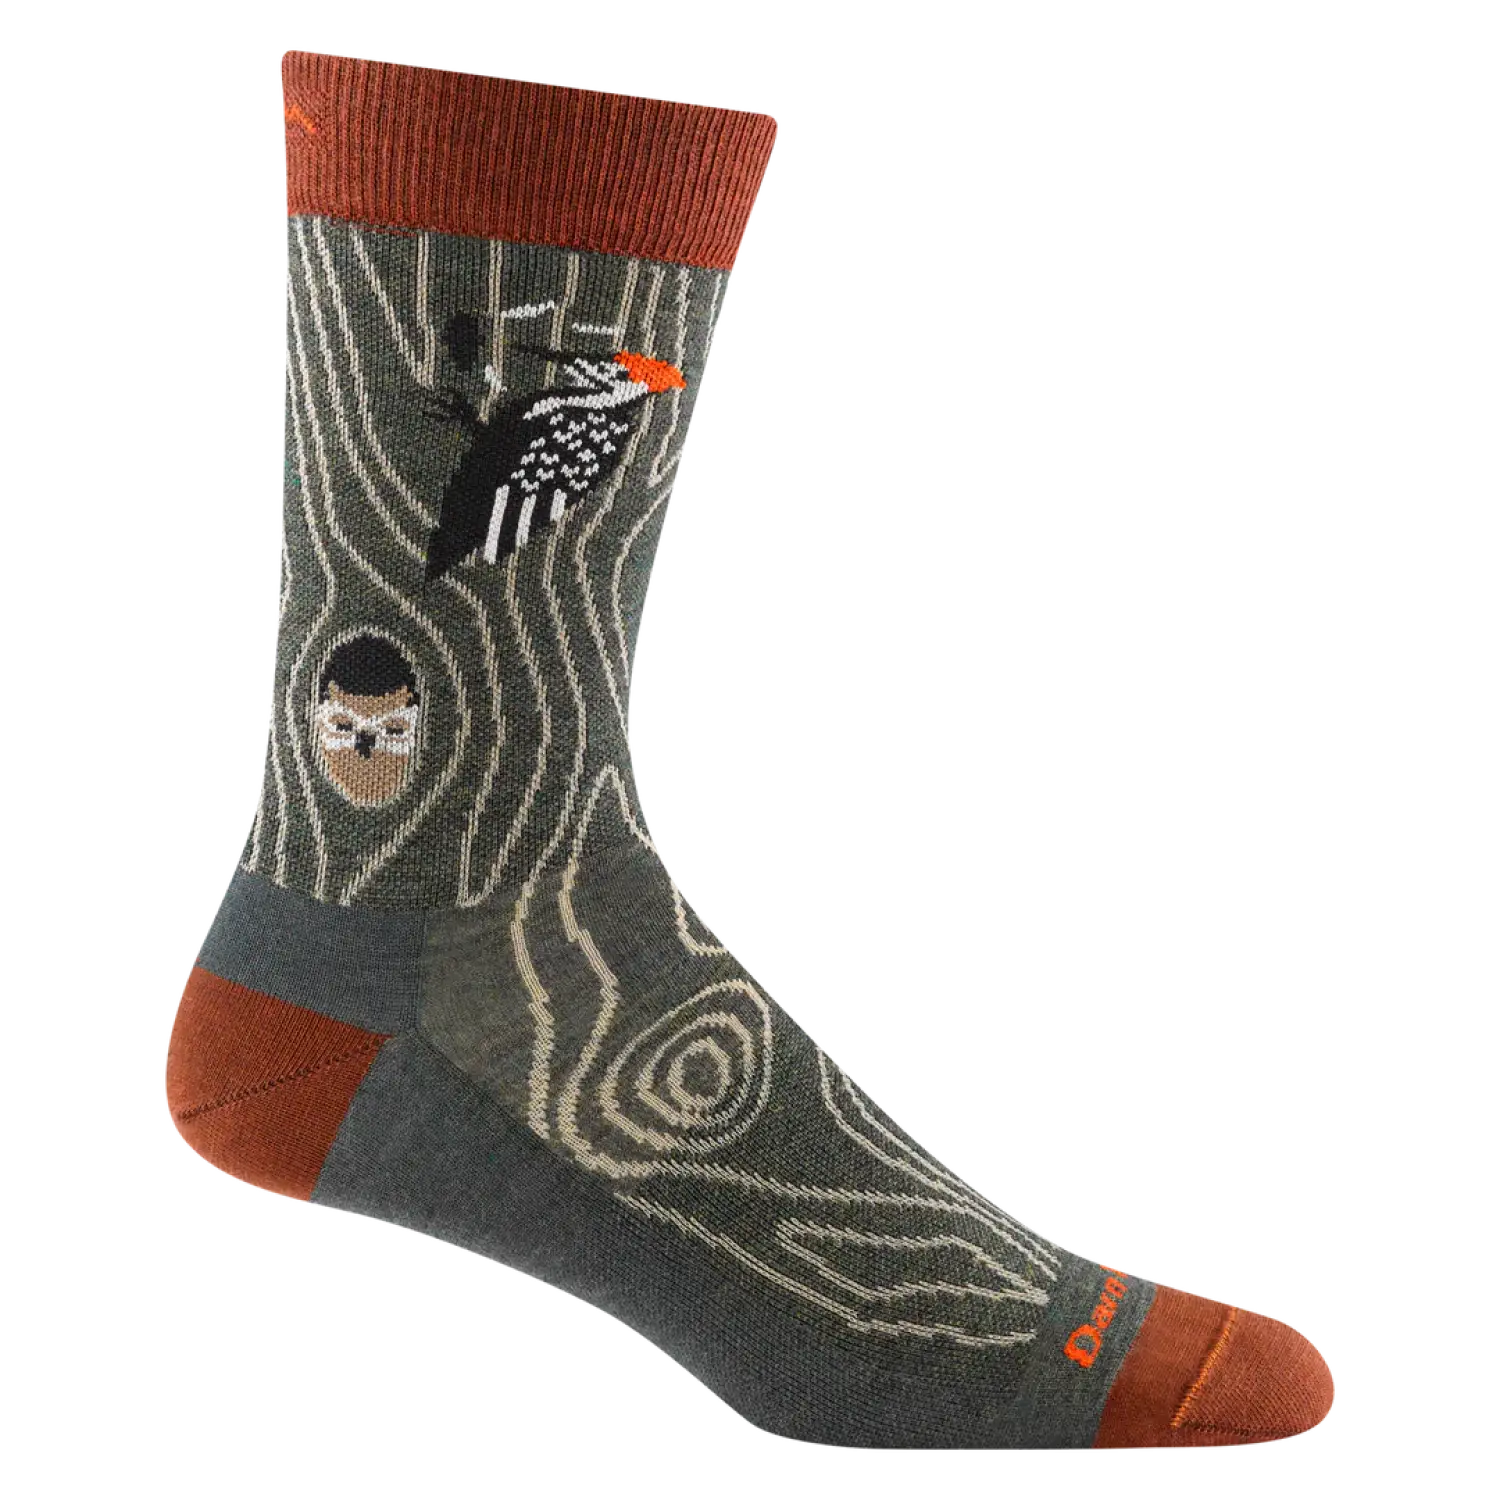 Darn Tough Men's Woody Crew Lightweight Lifestyle Sock shown in the Forest color option.